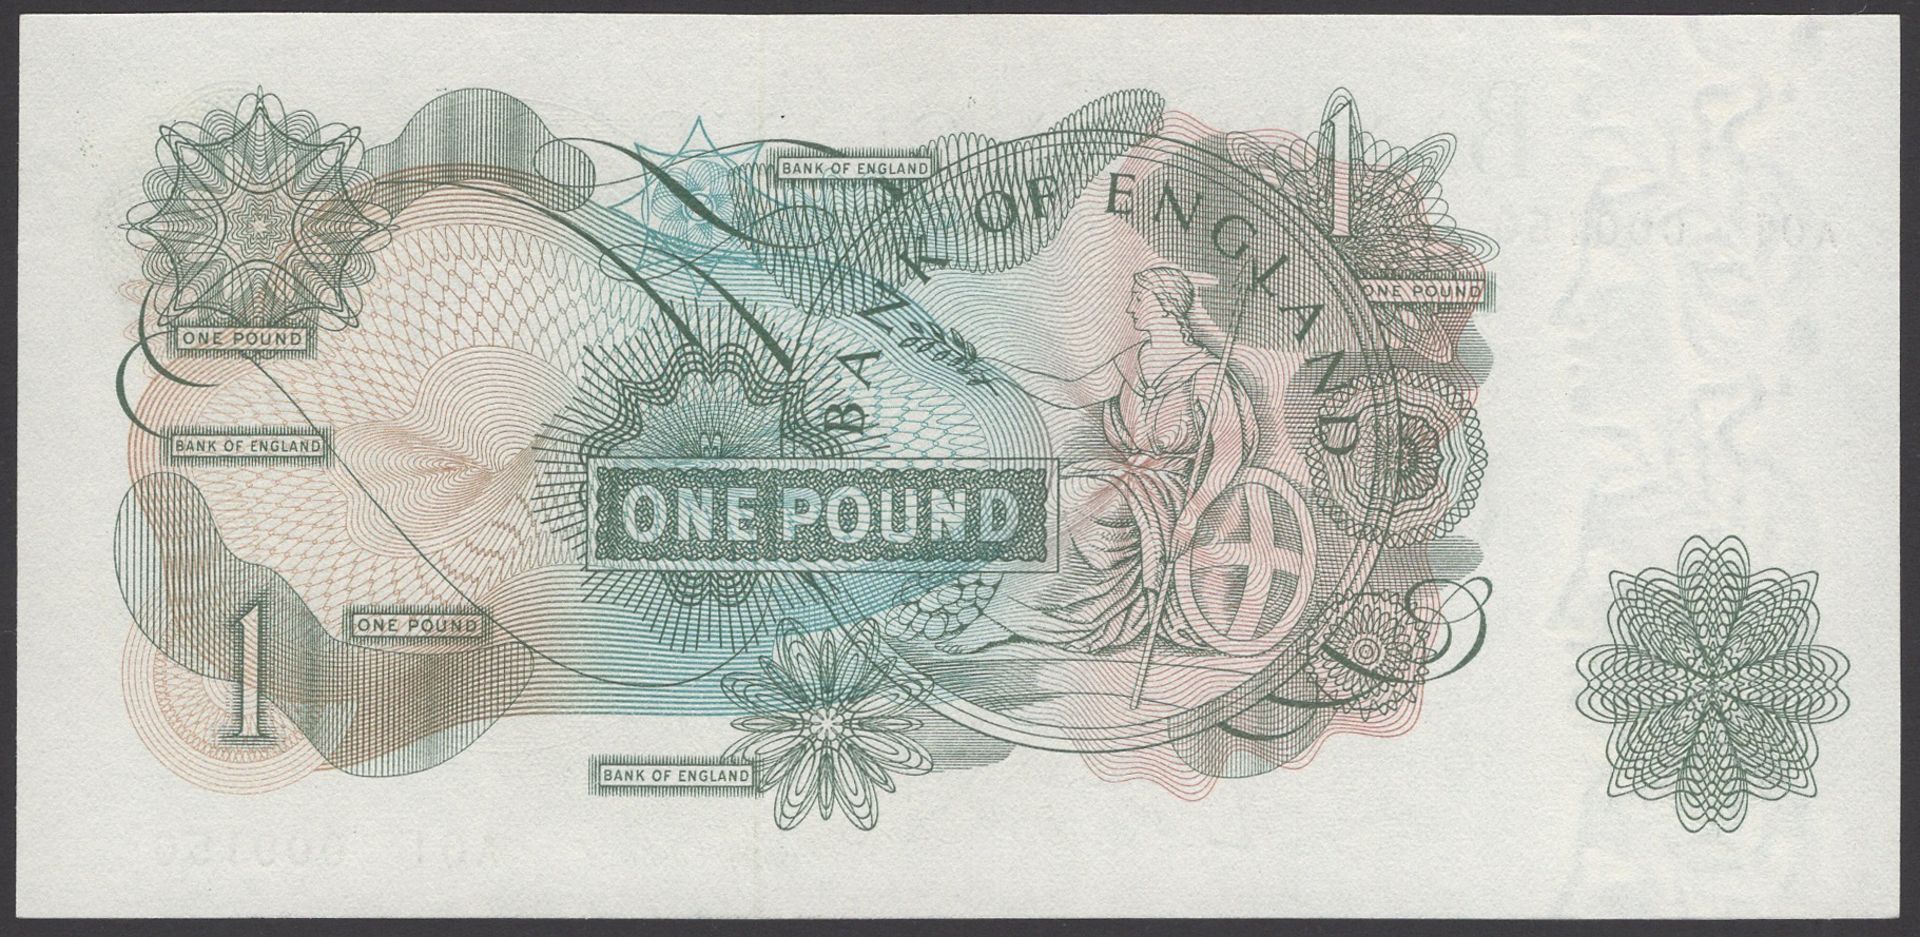 Bank of England, Leslie K. O'Brien, Â£1, 17 March 1960, serial number A01 000150, an original... - Image 2 of 2